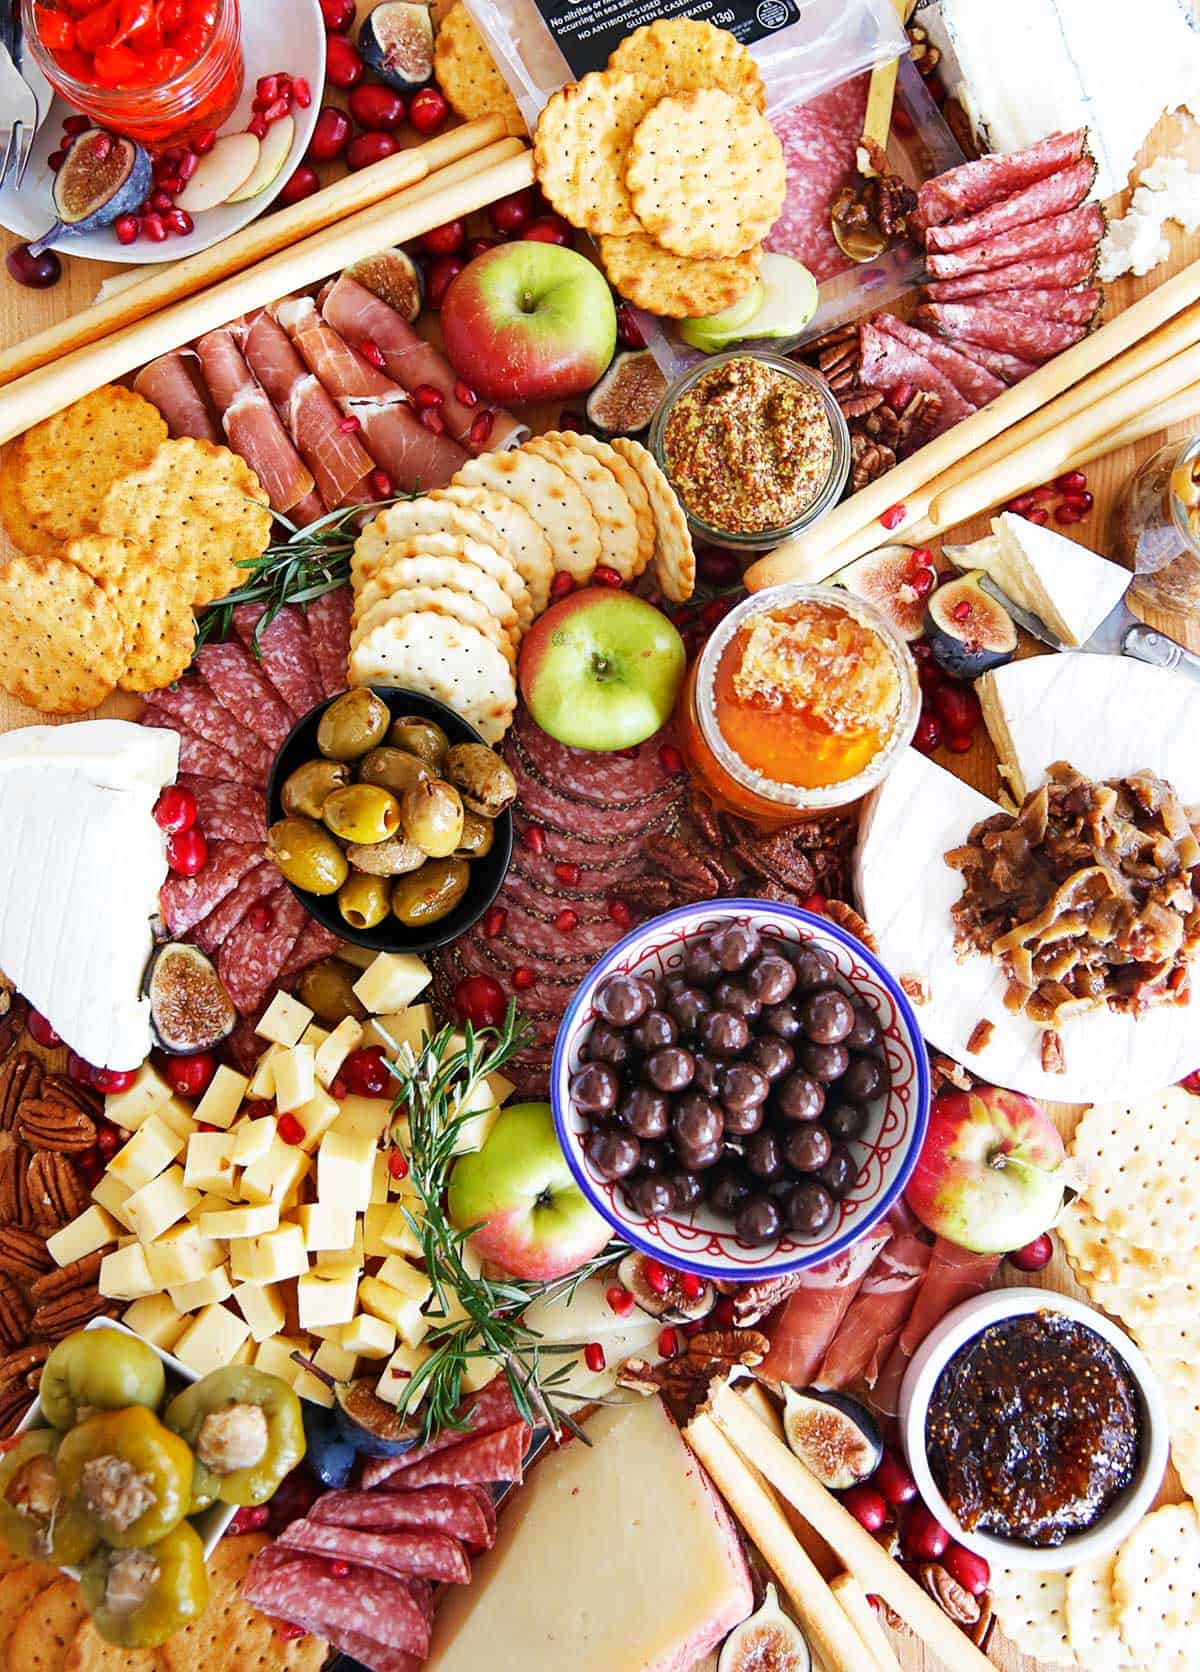 How To Make a Charcuterie Board Festive For The Holidays!